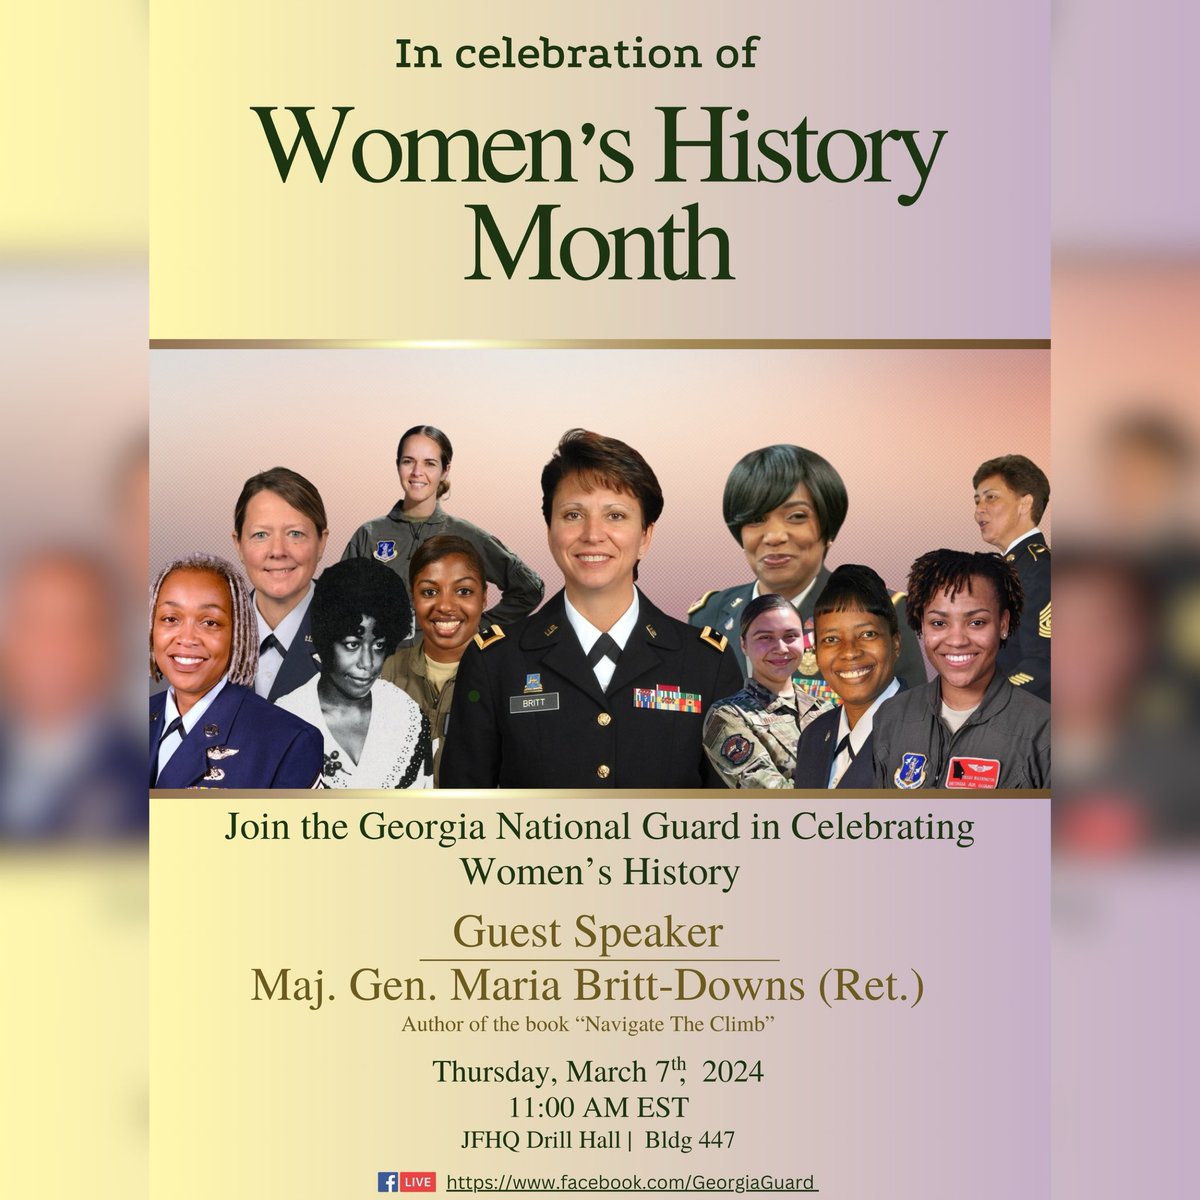 Join us on Thursday, March 7, on Facebook Live, as we celebrate the countless contributions that women have made to our country and our U.S. Armed Forces! #WomensHistoryMonth #SharedValues #SharedPurpose #SharedVictory